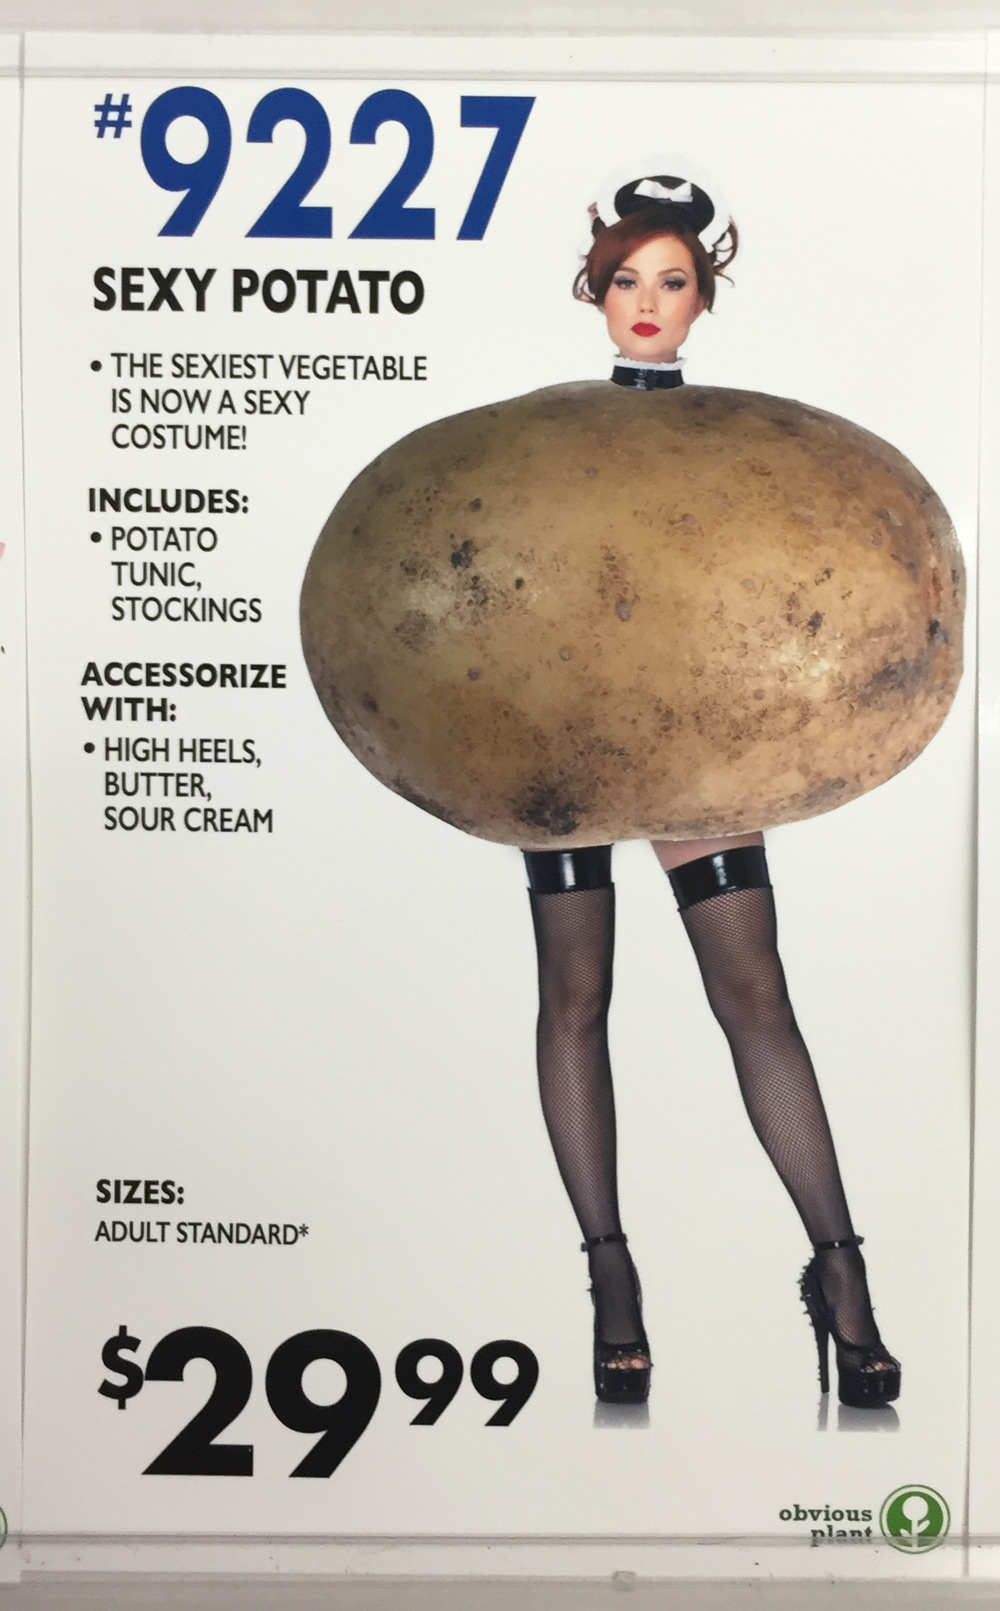 obvious plant - Sexy Potato The Sexiest Vegetable Is Now A Sexy Costume! Includes Potato Tunic Stockings Accessorize With High Heels, Butter Sour Cream Sizes Adult Standard $2999 obvious plant